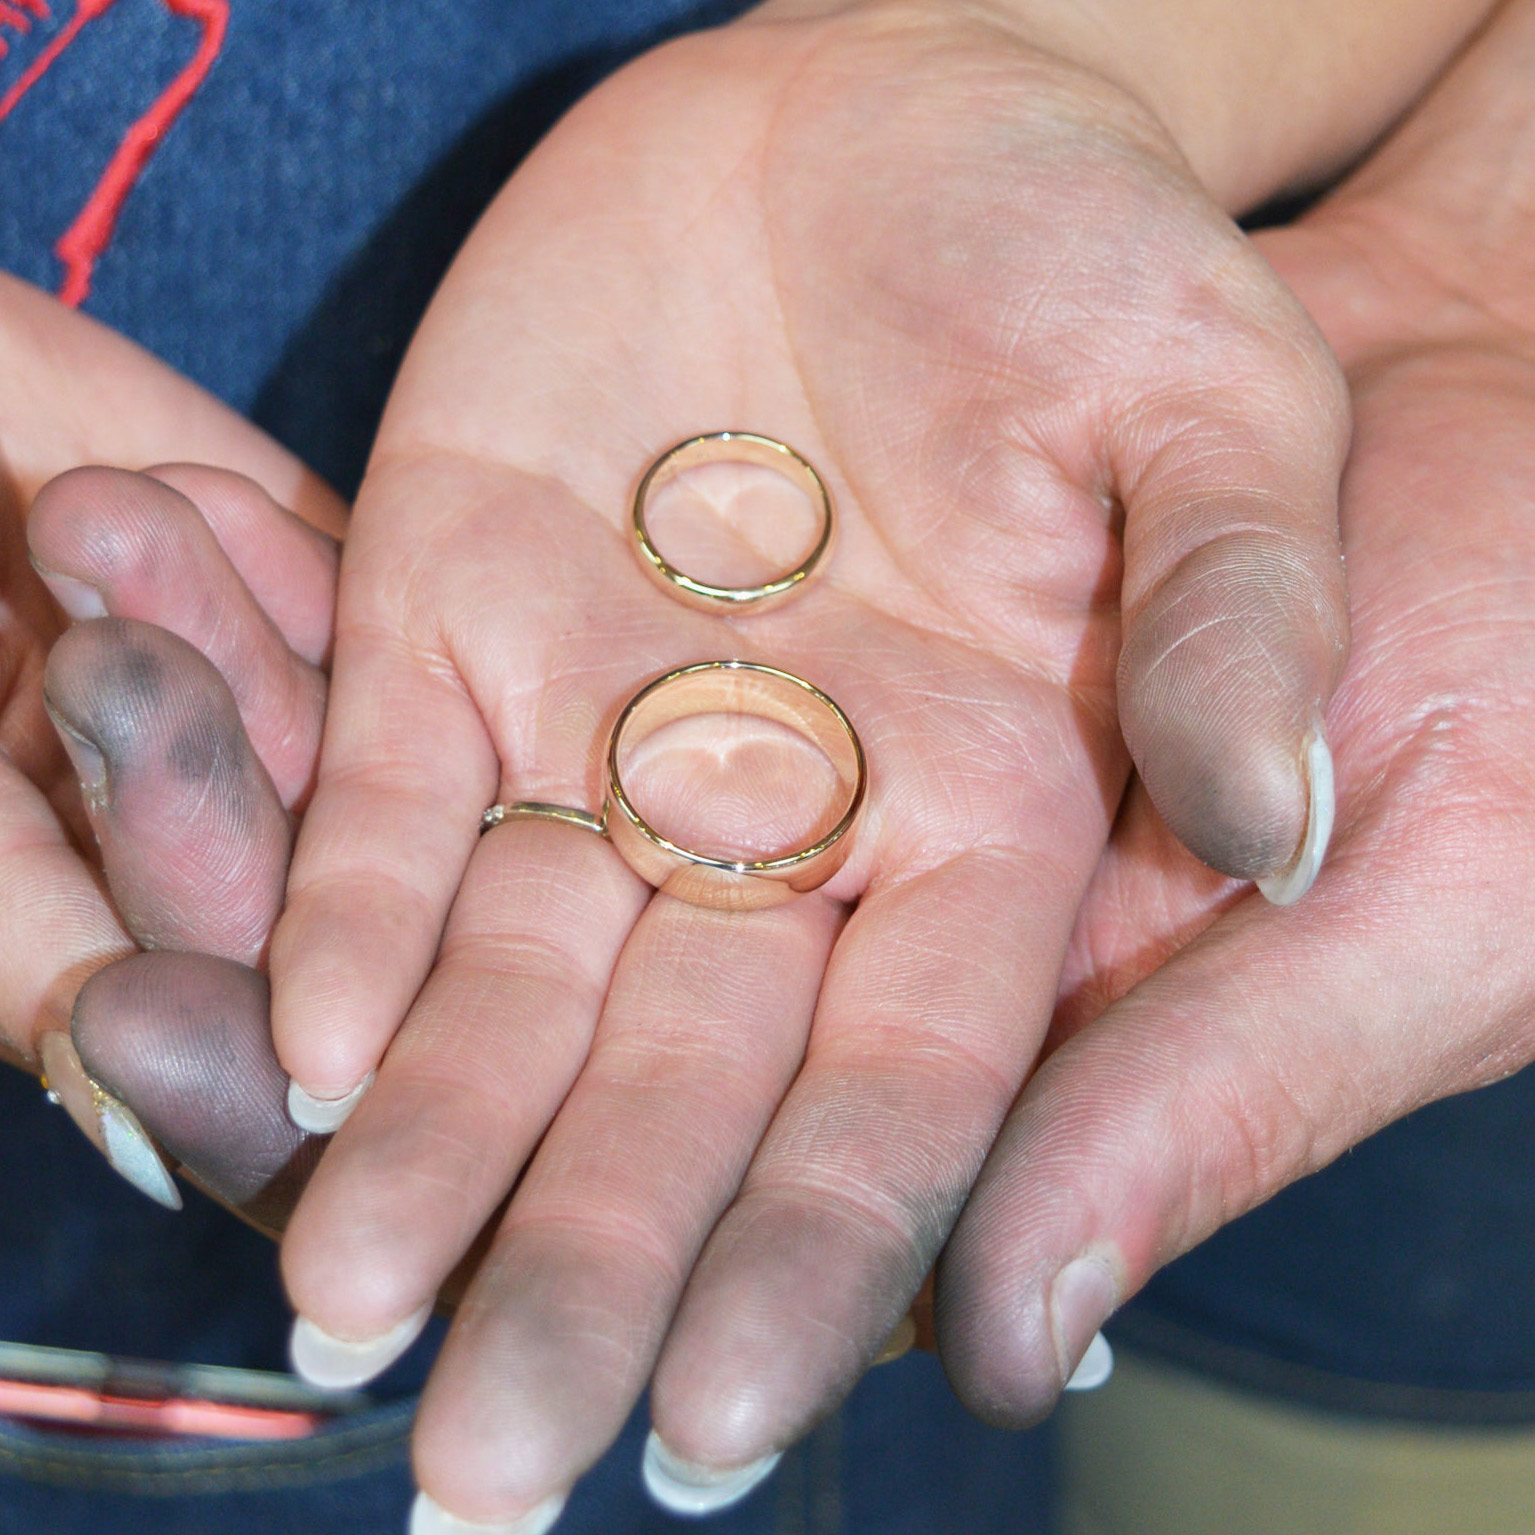 Couples Create - Creating Your Own Wedding Rings